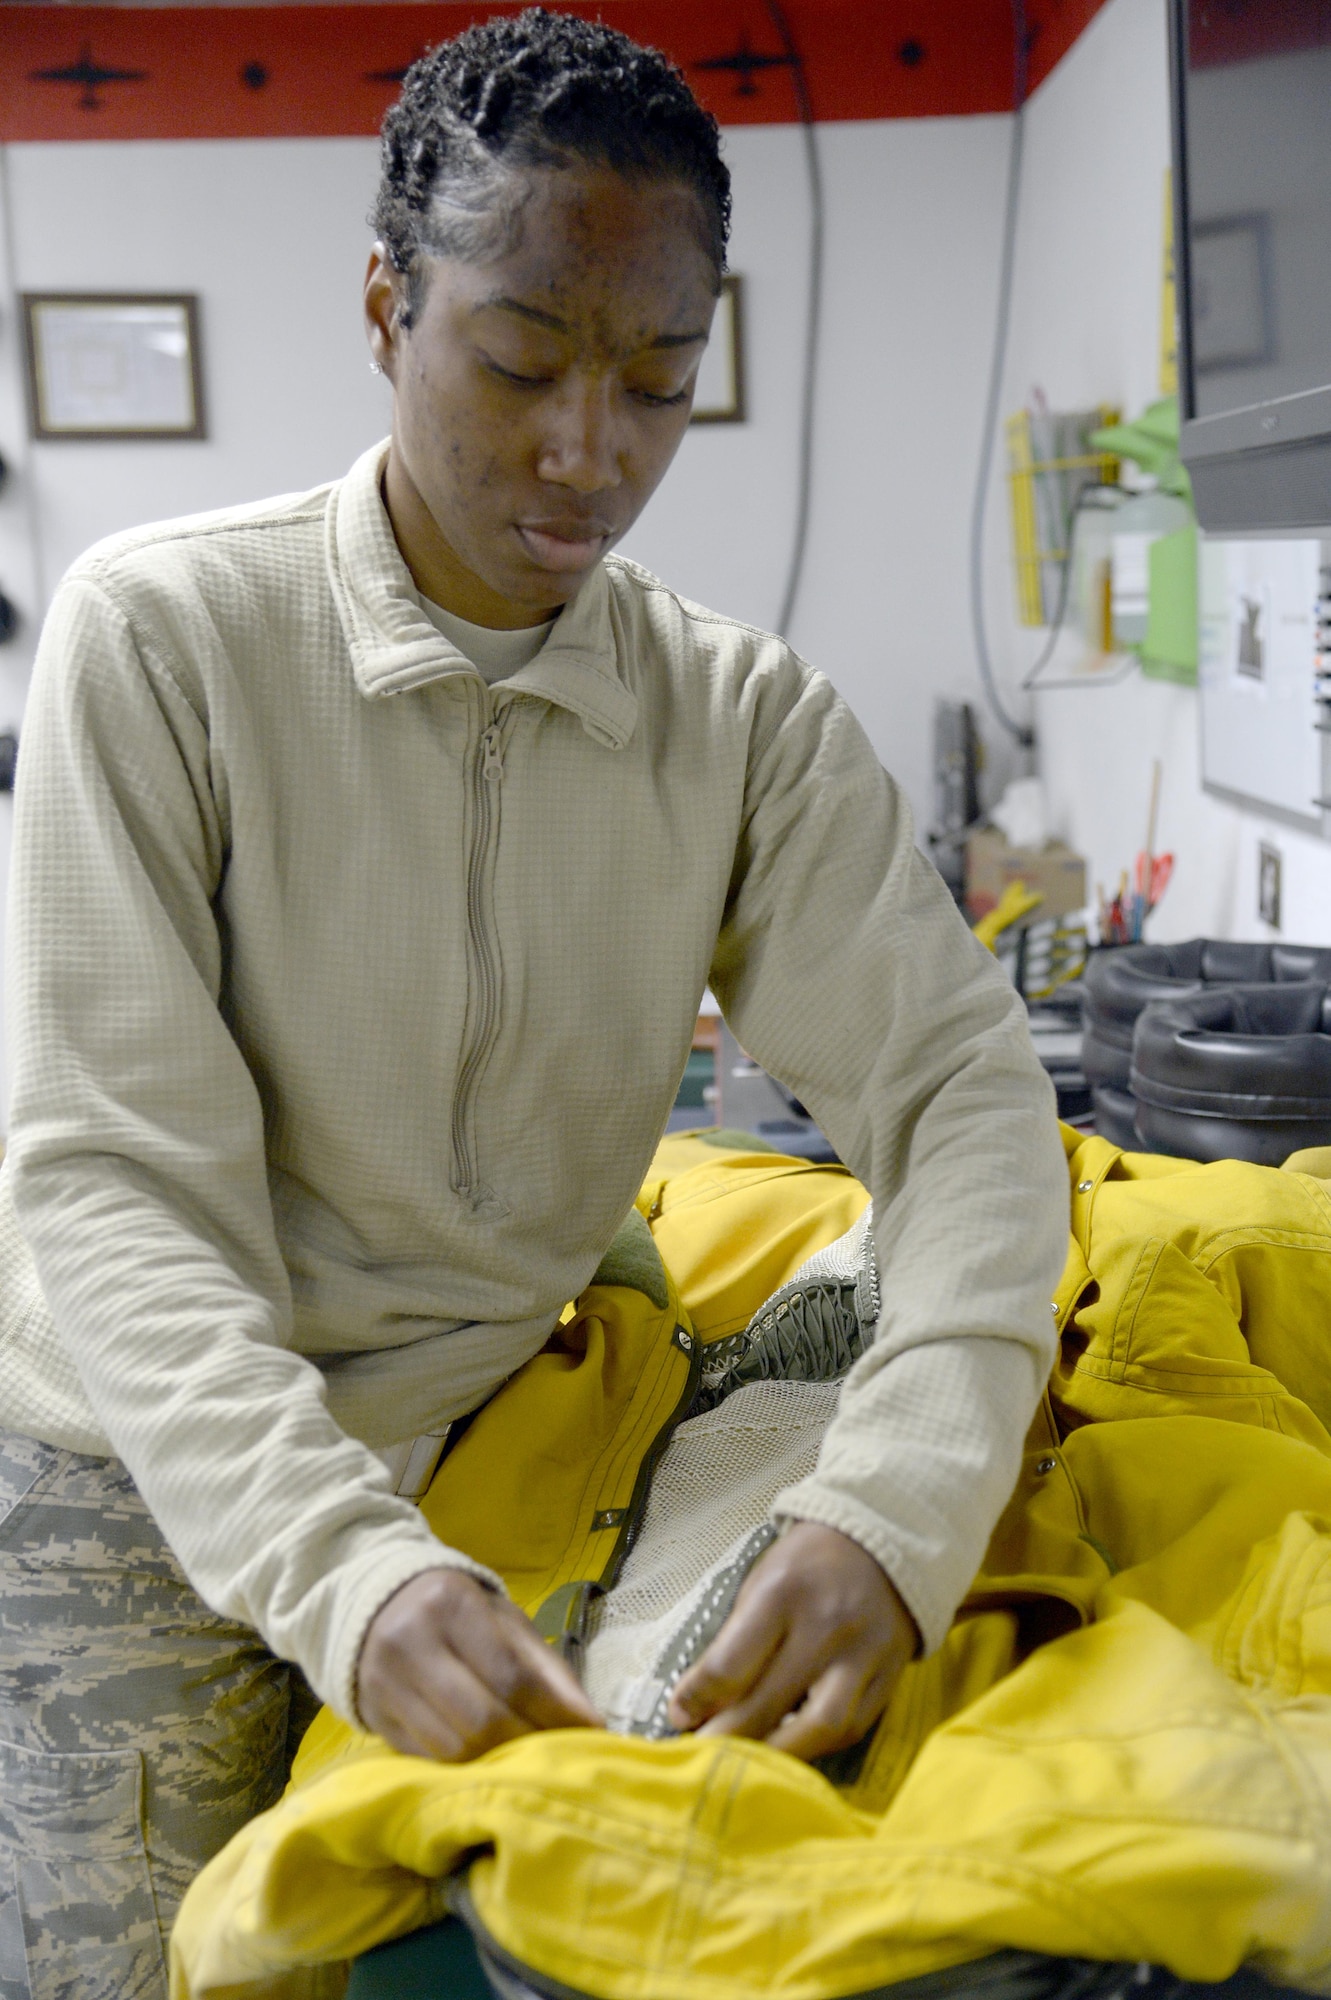 Senior Airman Andrea, launch and recovery technician, performs an inspection on a full pressure suit at an undisclosed location in Southwest Asia Jan. 20, 2015. The mission of the physiological support detachment is to inspect and maintain the full pressure suits necessary for the U-2 Dragon Lady pilot to survive above 50,000 feet and fly up to 70,000 feet. Andrea is currently deployed from Beale Air Force Base, Calif., and is a native of Centerville, Ga. (U.S. Air Force photo/Tech. Sgt. Marie Brown)